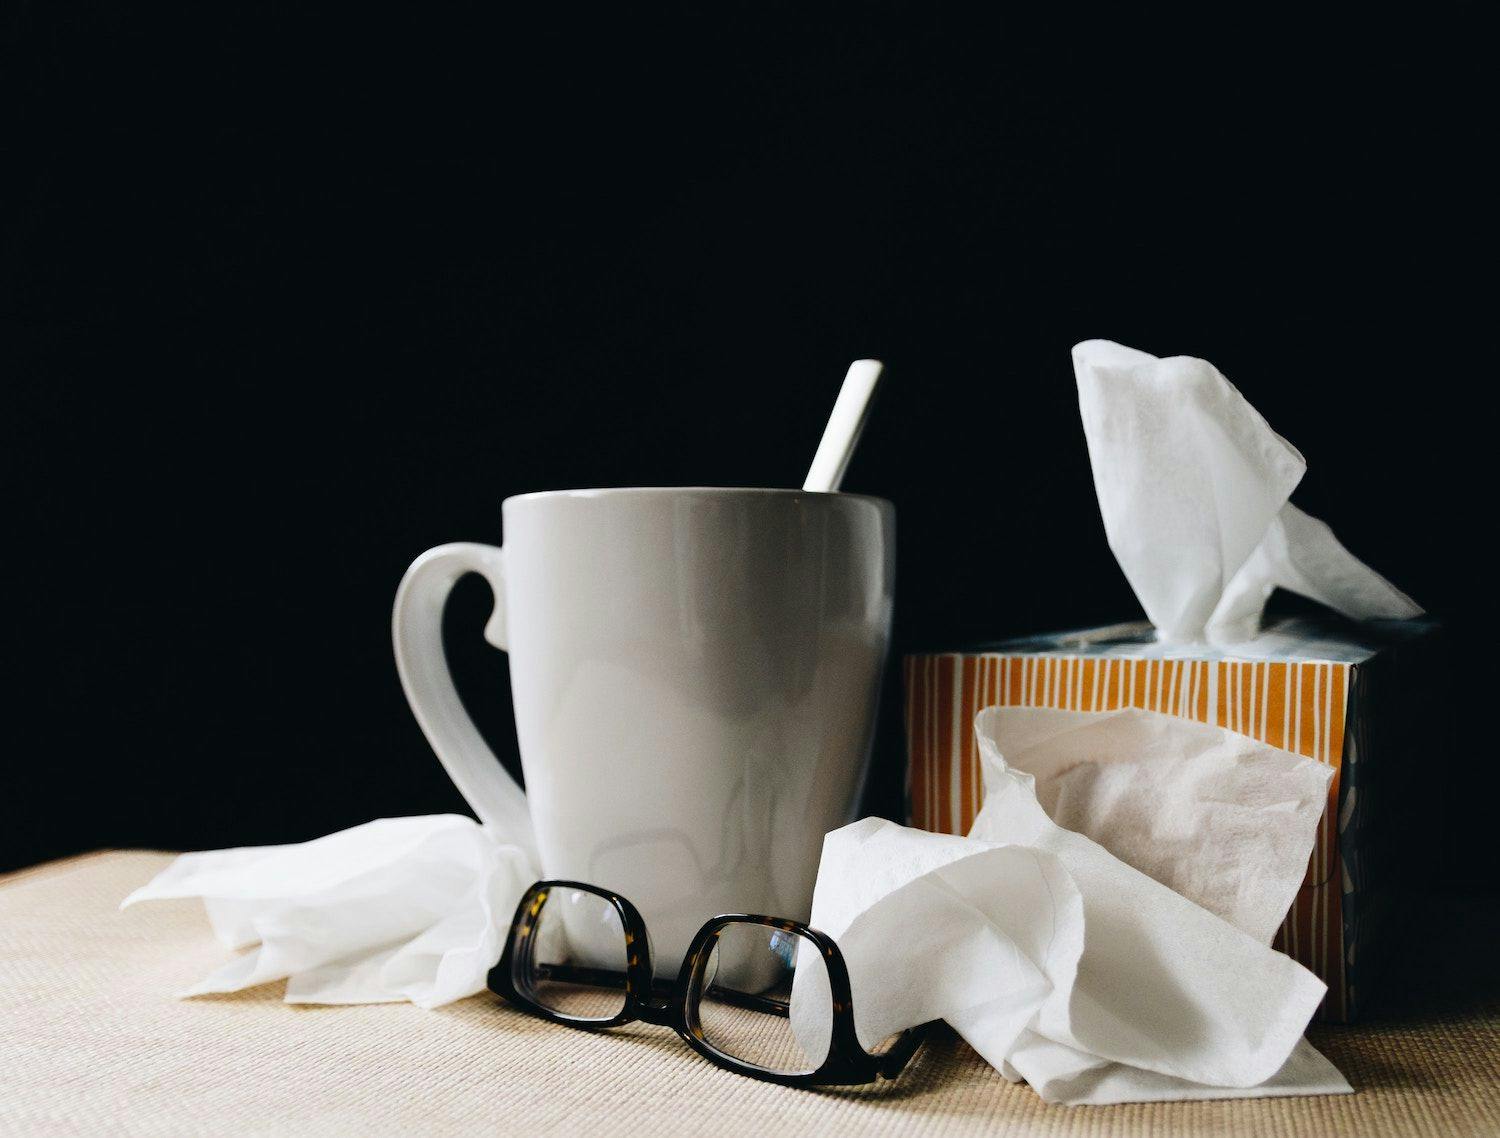 Image shows a mug of tea, a pair of glasses and a tissue box with tissues scattered.